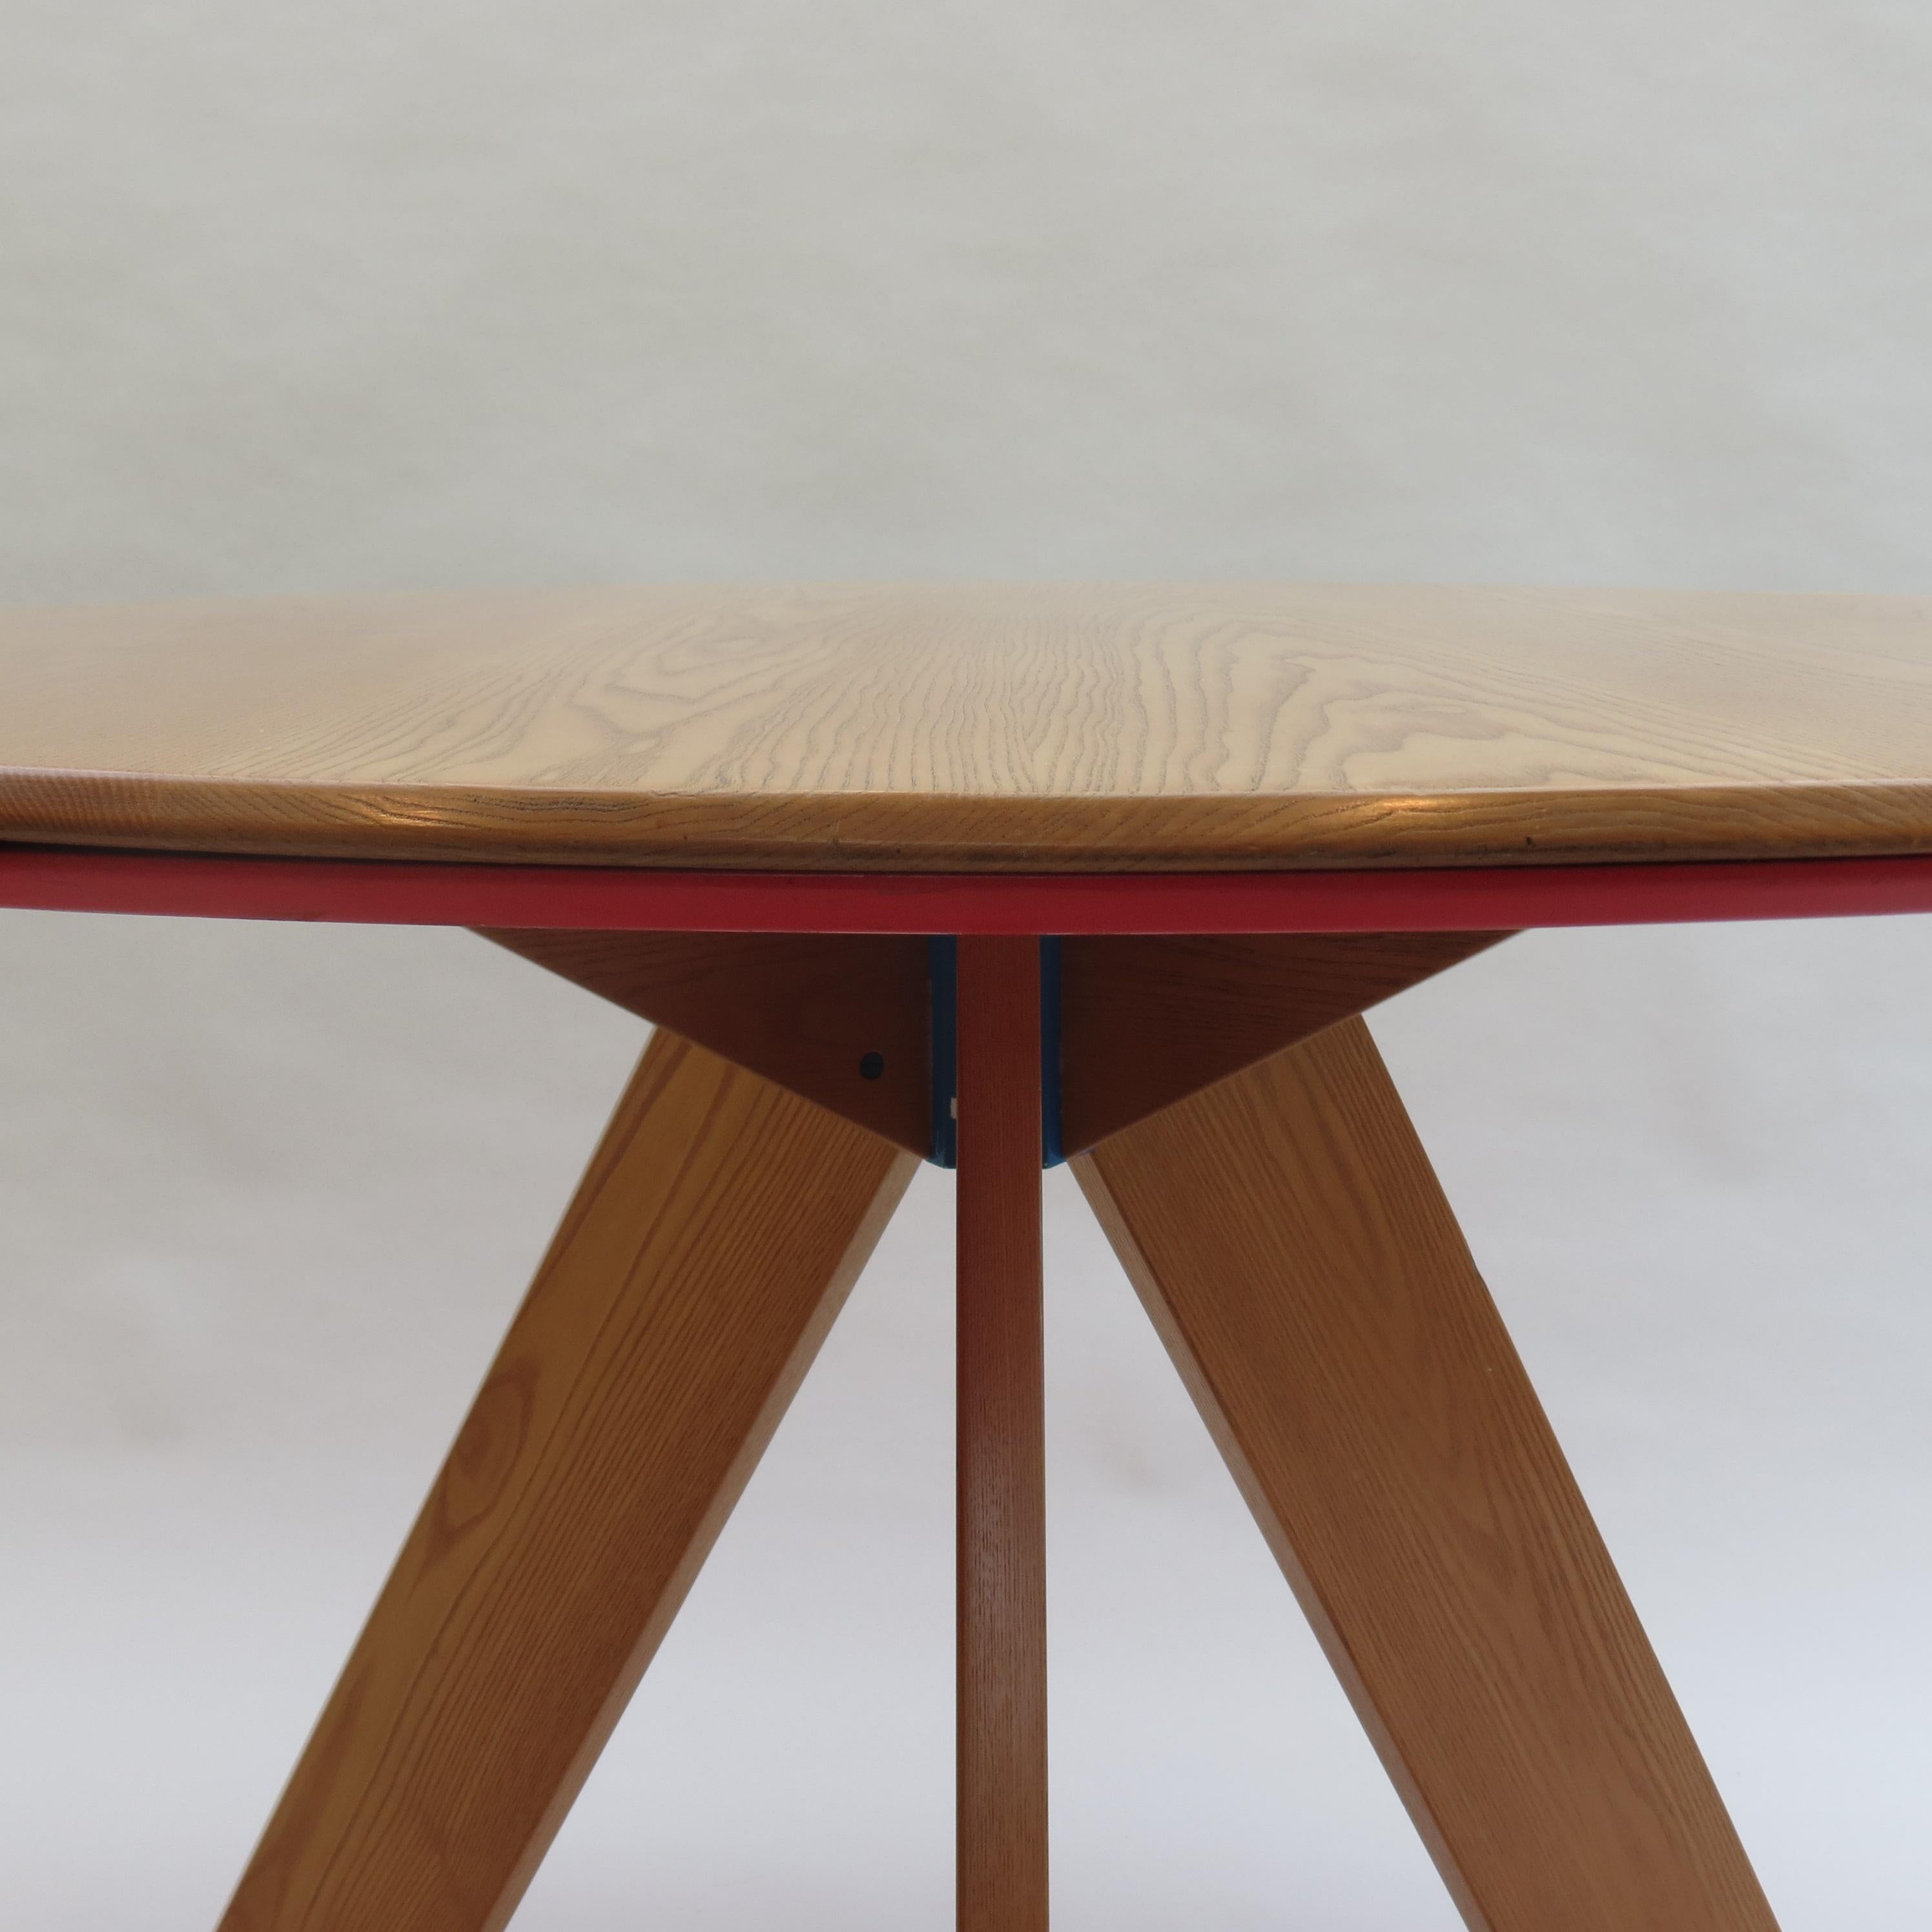 Midcentury Bespoke Round Dining Table by David Field 1980s with Red and Blue Det 2